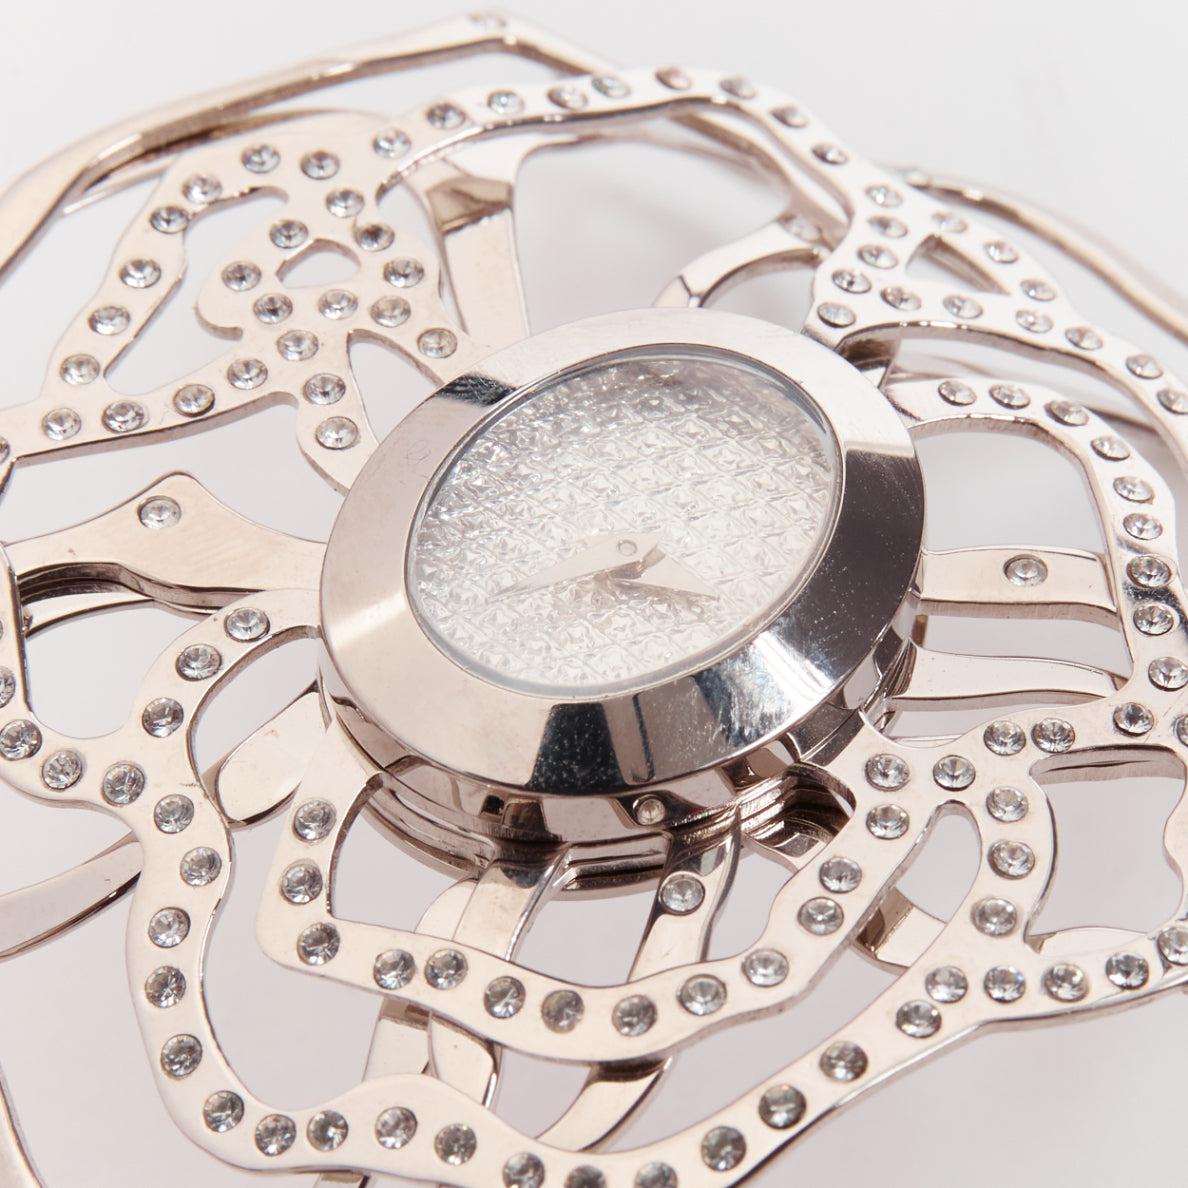 VALENTINO Vintage silver crystal flower stainless steel bracelet watch
Reference: GIYG/A00285
Brand: Valentino
Material: Stainless Steel
Color: Silver
Pattern: Floral
Lining: Silver Metal

CONDITION:
Condition: Good, this item was pre-owned and is